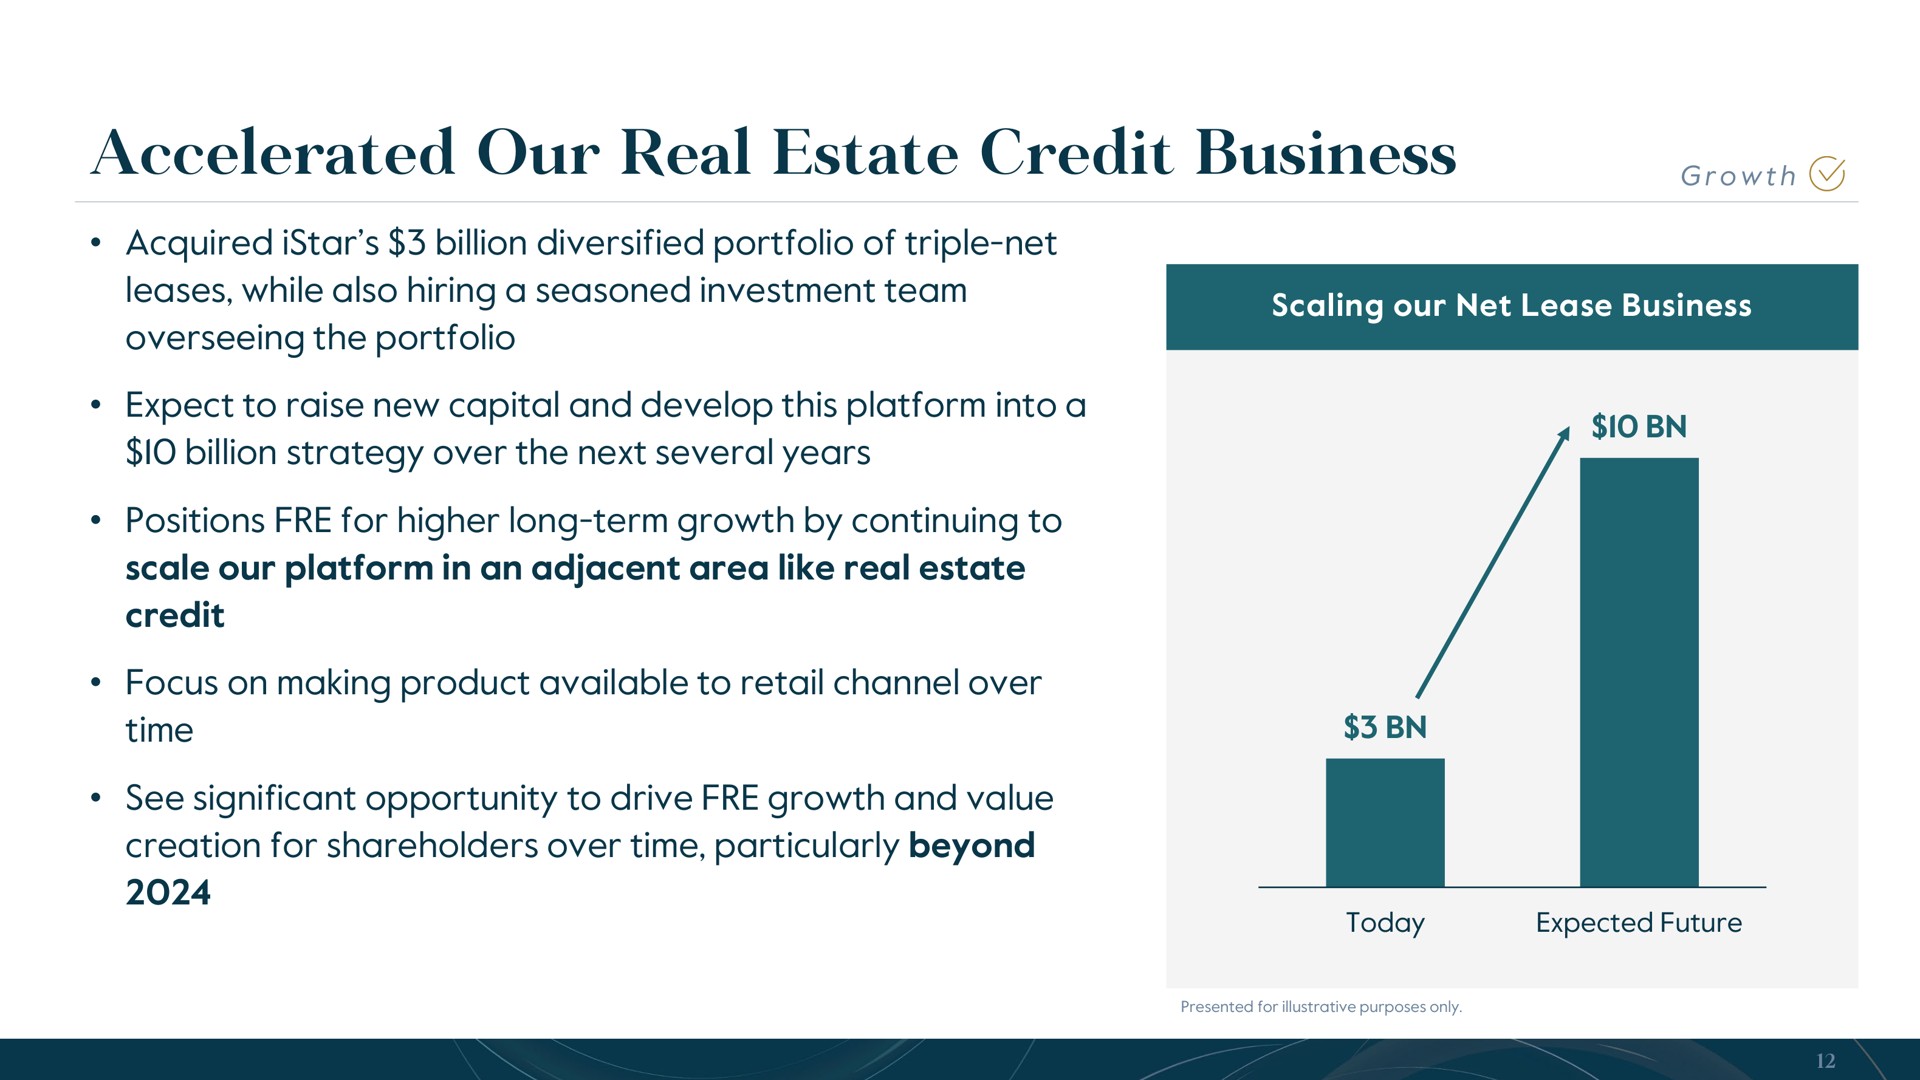 accelerated our real estate credit business growth | Carlyle